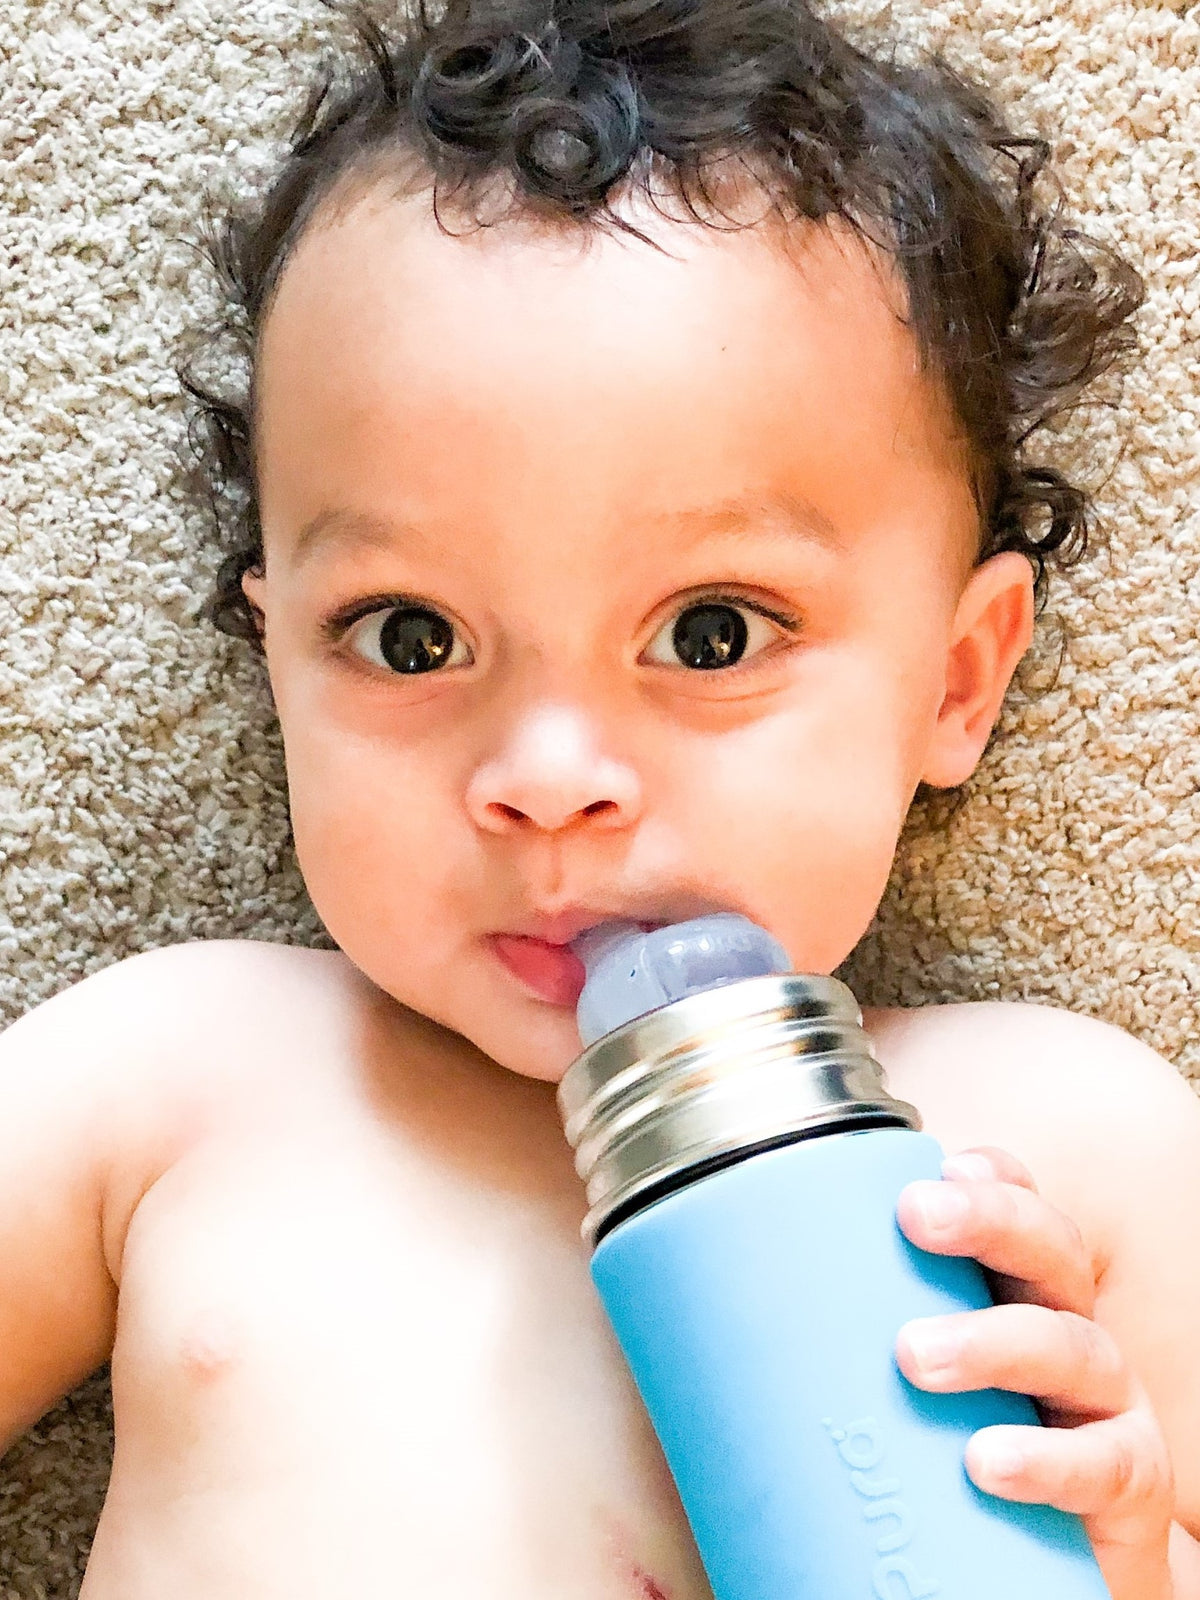 Teething: Tips for Soothing Sore Gums